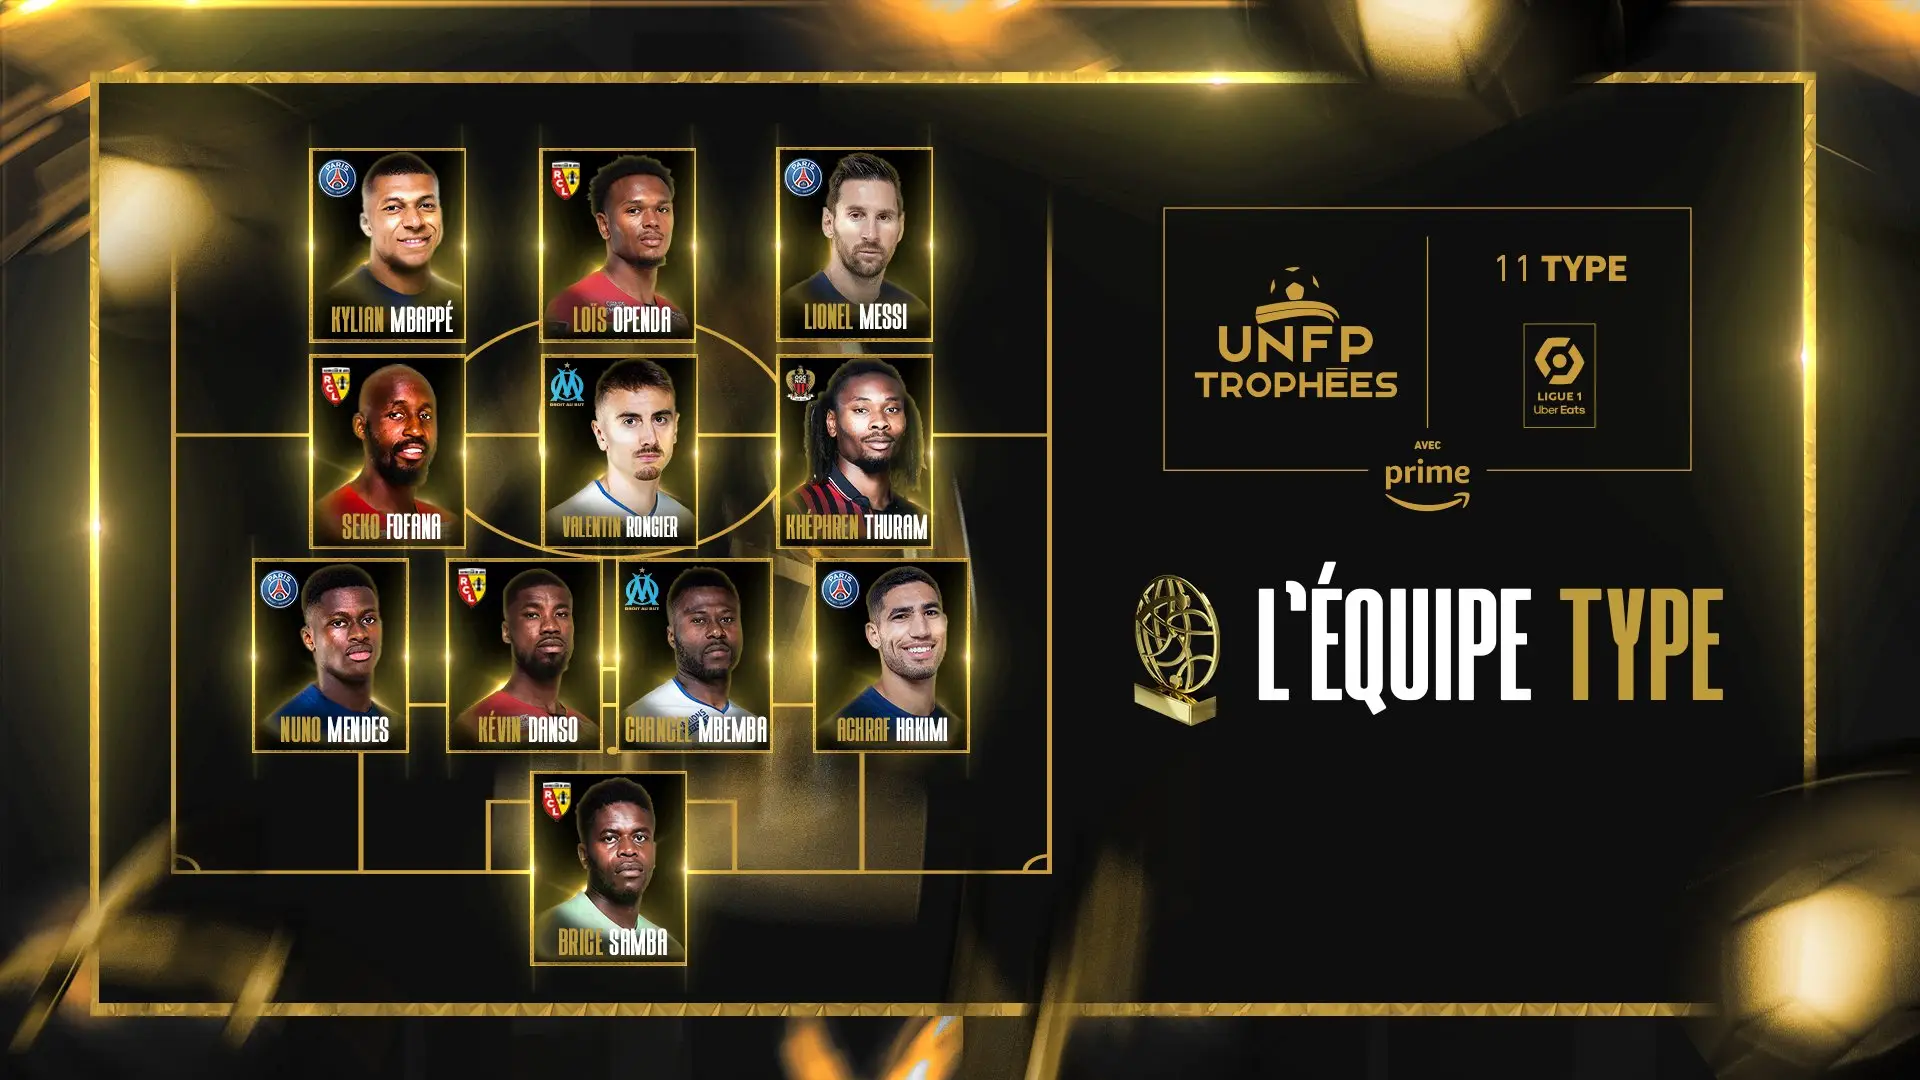 Lionel Messi and 3 other PSG players included in Ligue 1 Team of the Season